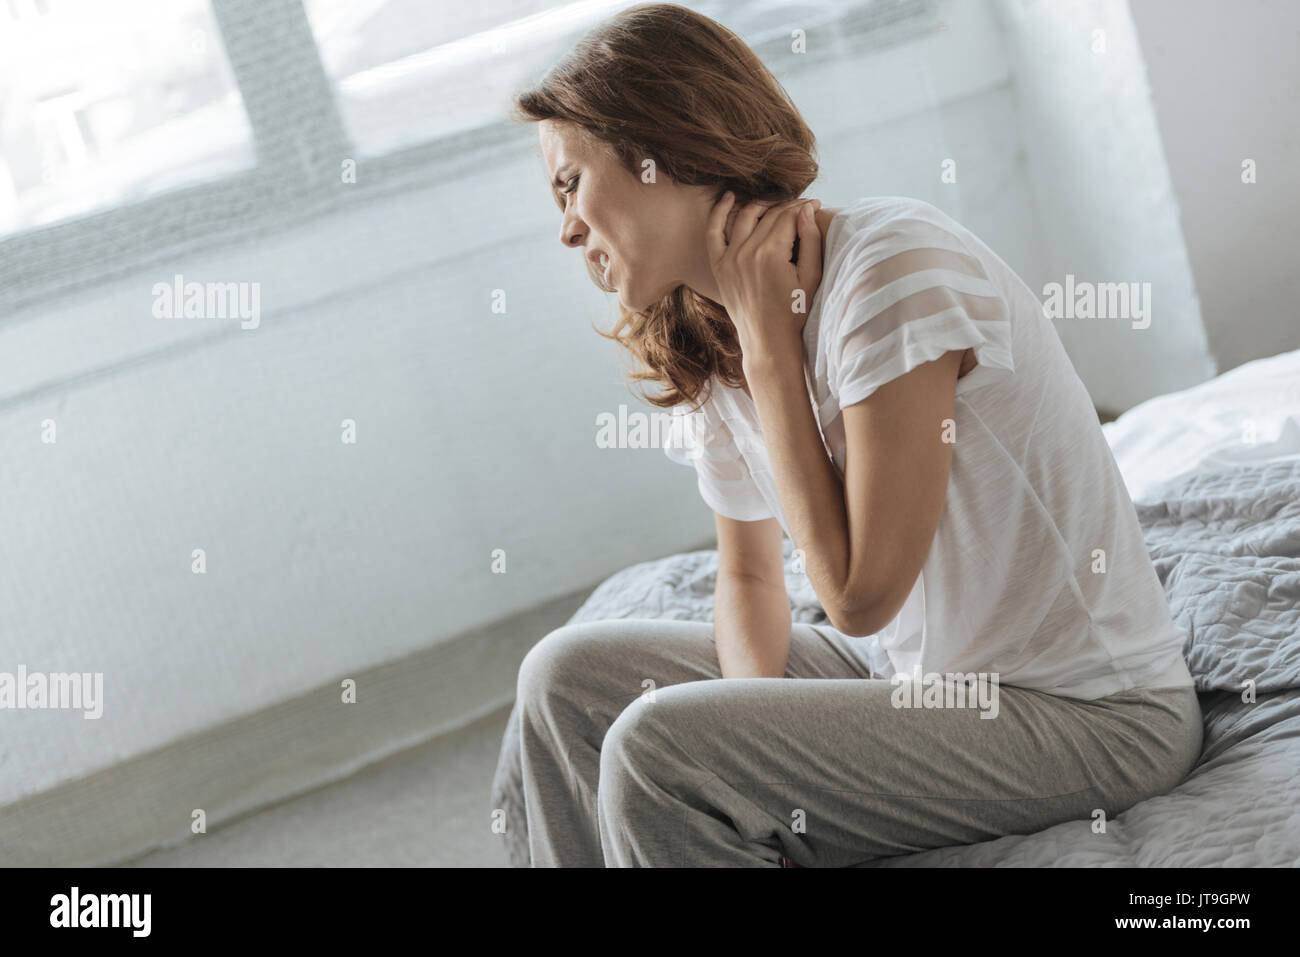 Sad depressed woman suffering from neck inflammation Stock Photo